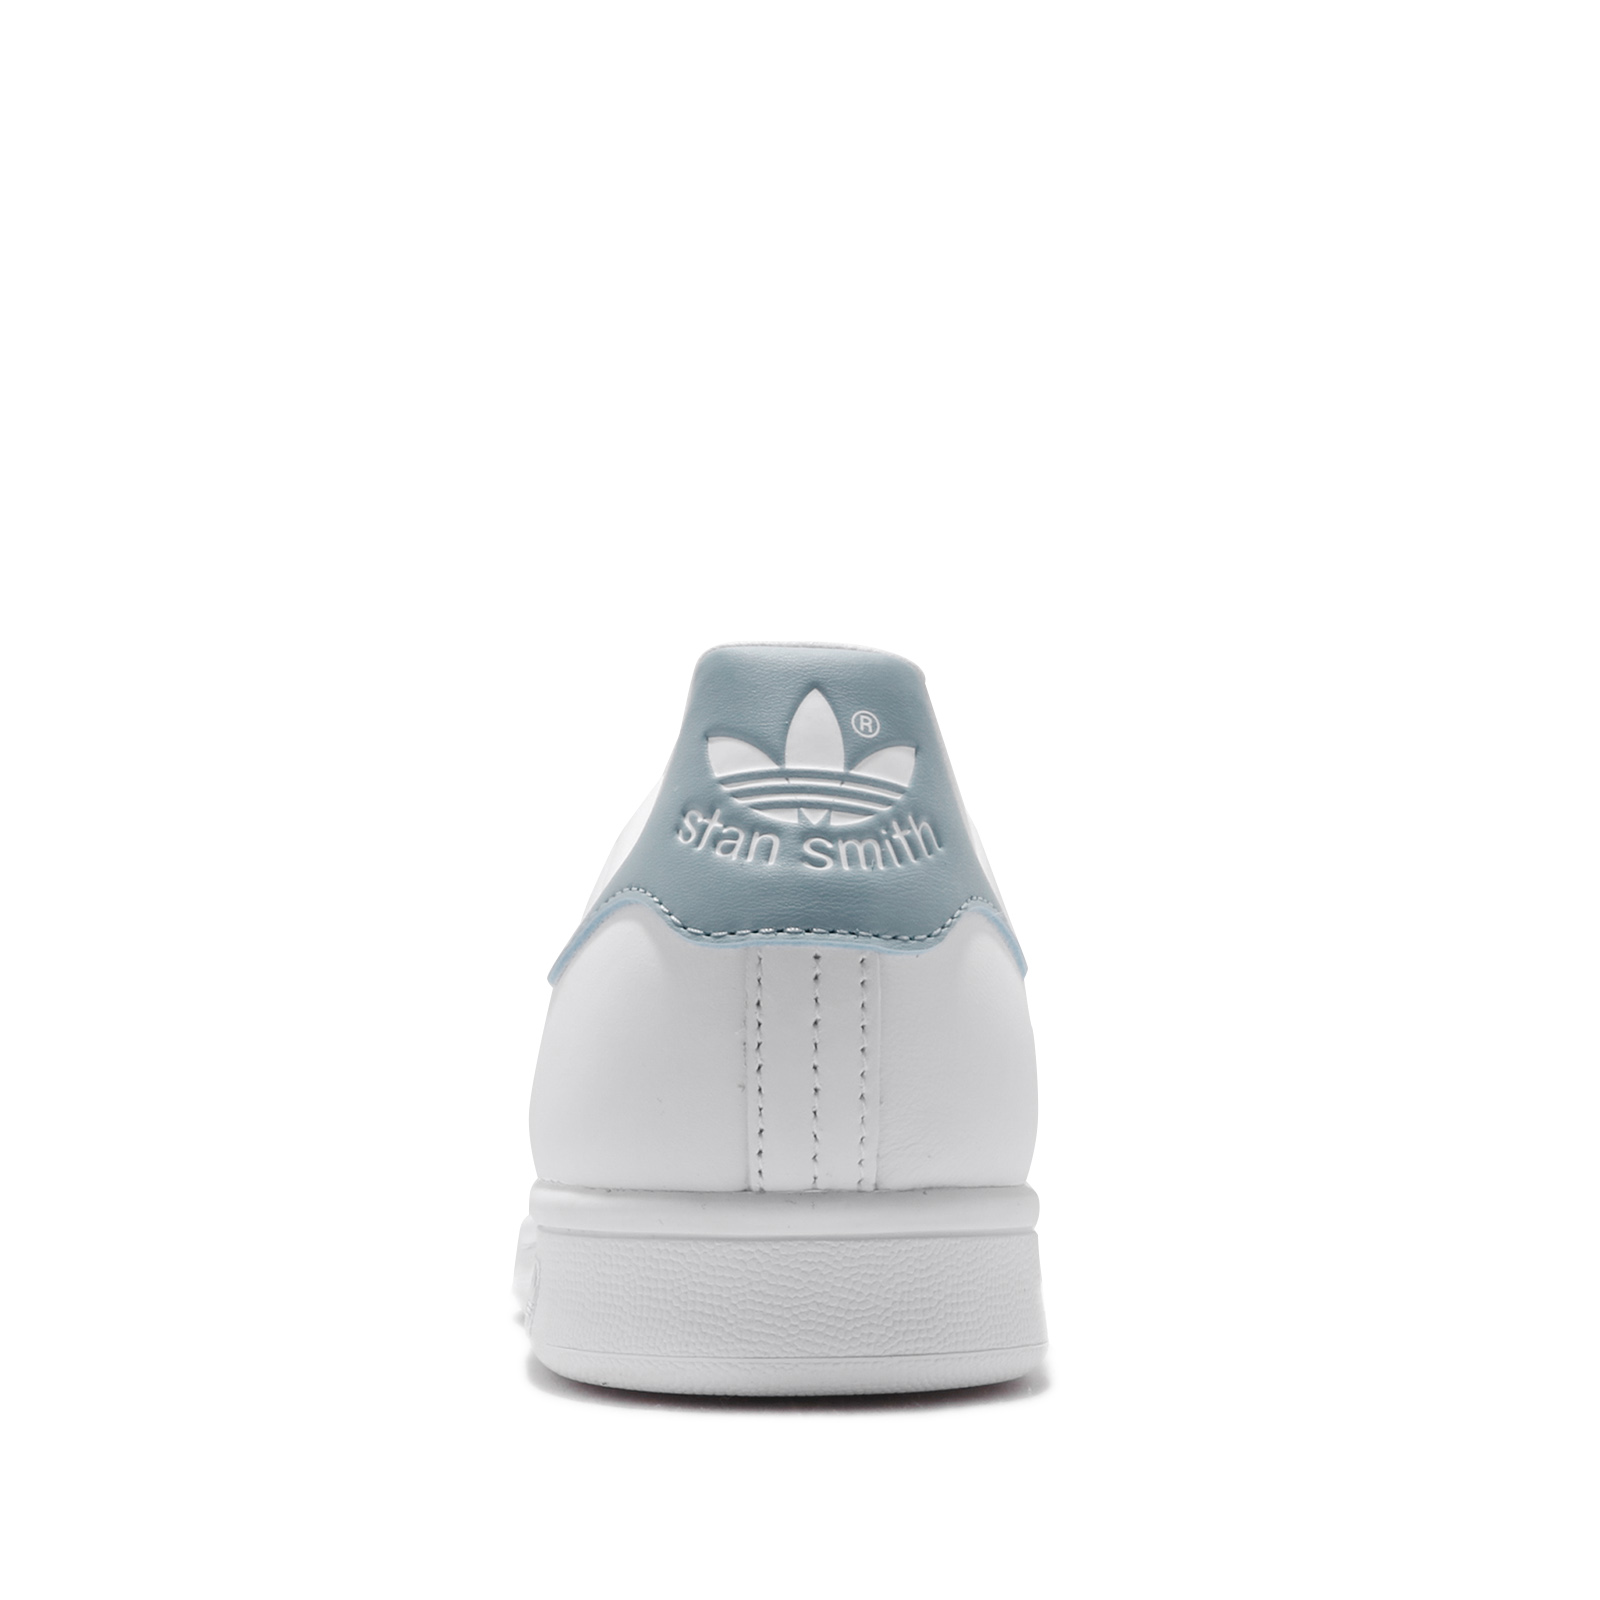 stan smith ee5797 Hot Sale - OFF 65%